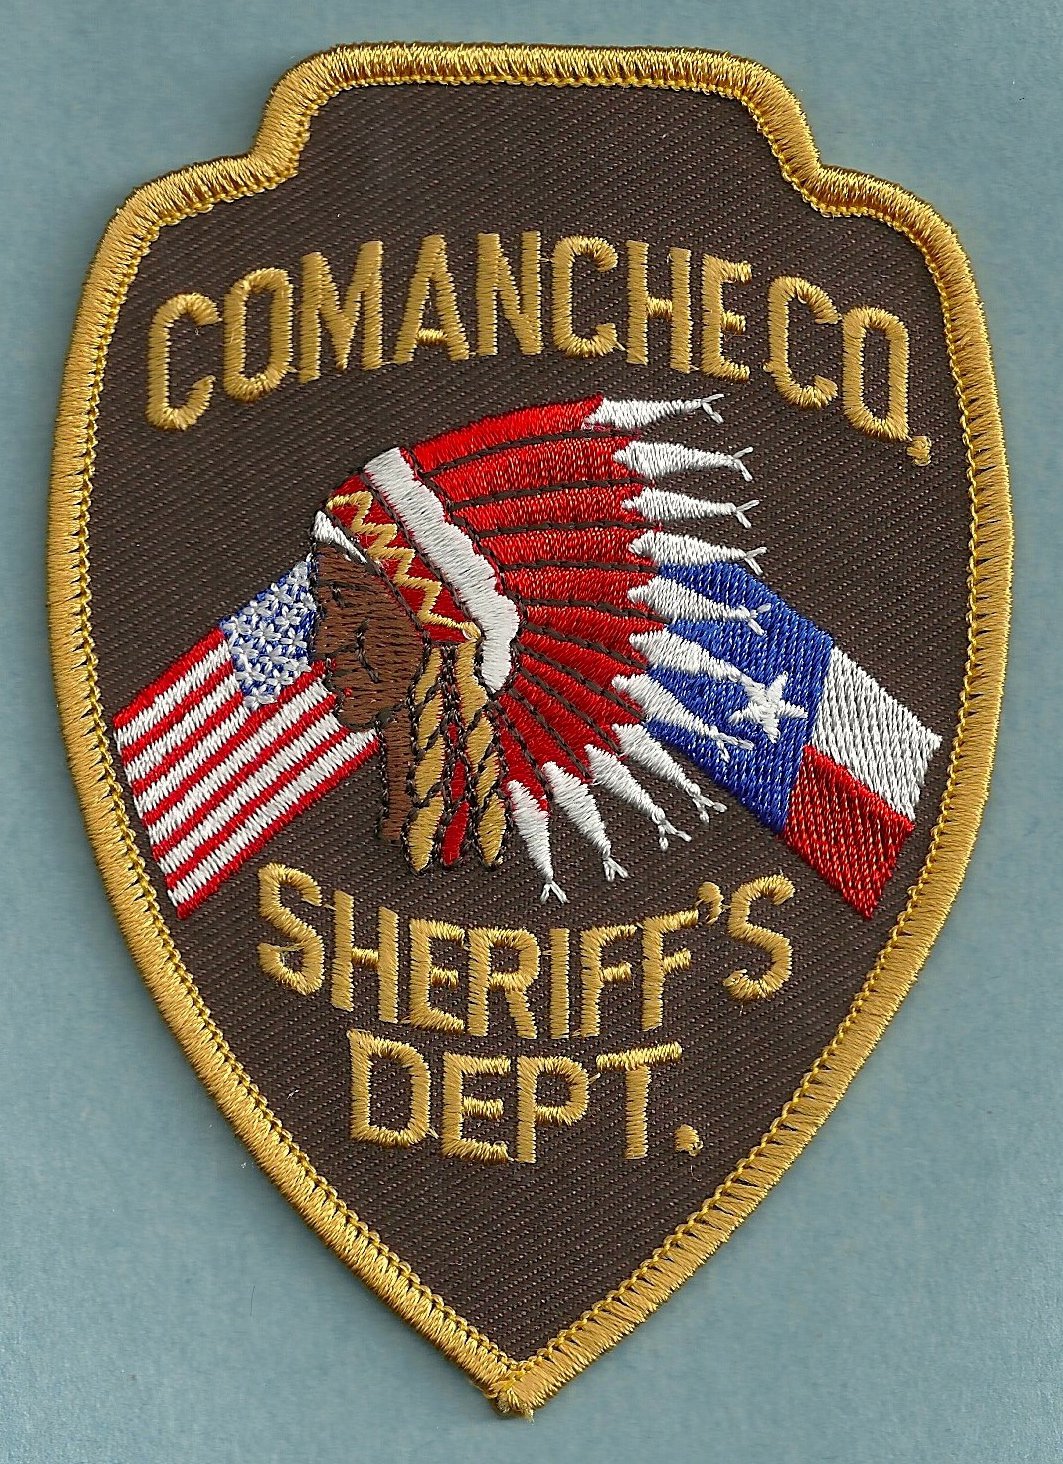 Comanche County Sheriff Patch from Texas in mint condition. 